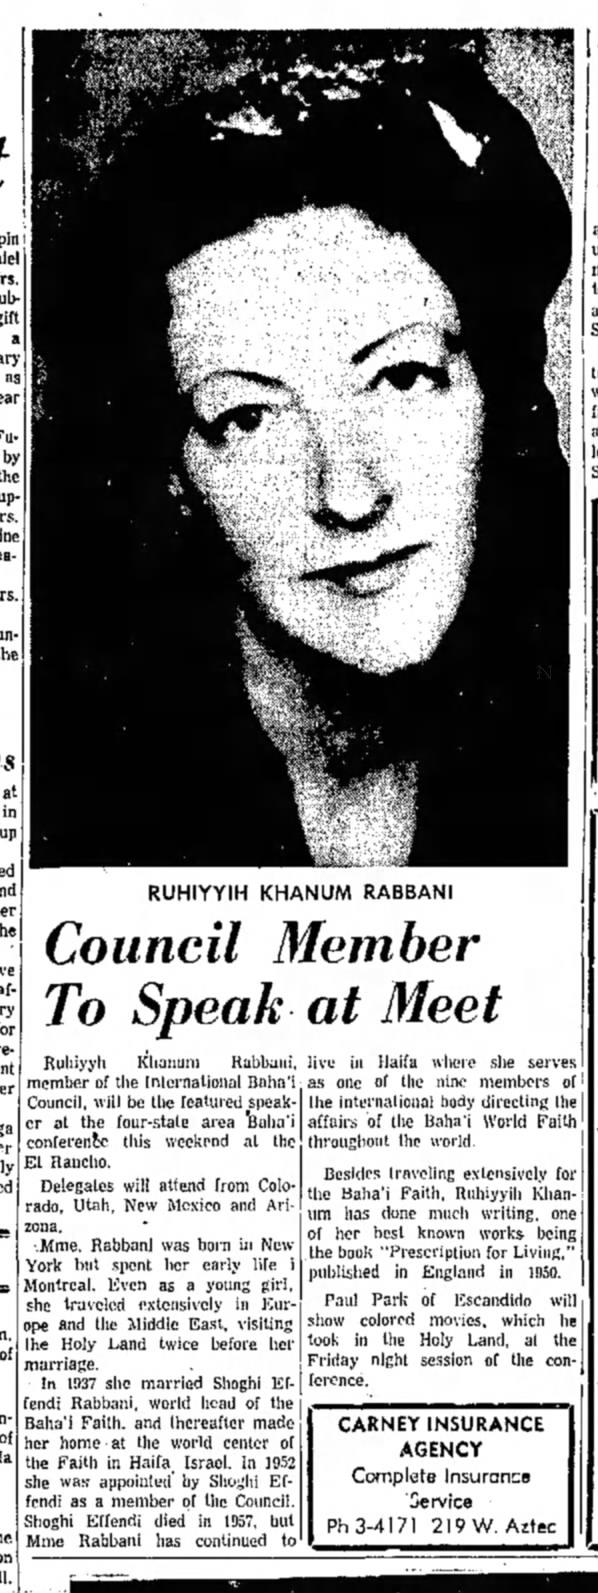 1960-05-03,TheGallup(NM)Indept,Council_Member_To_Speak{RKH}